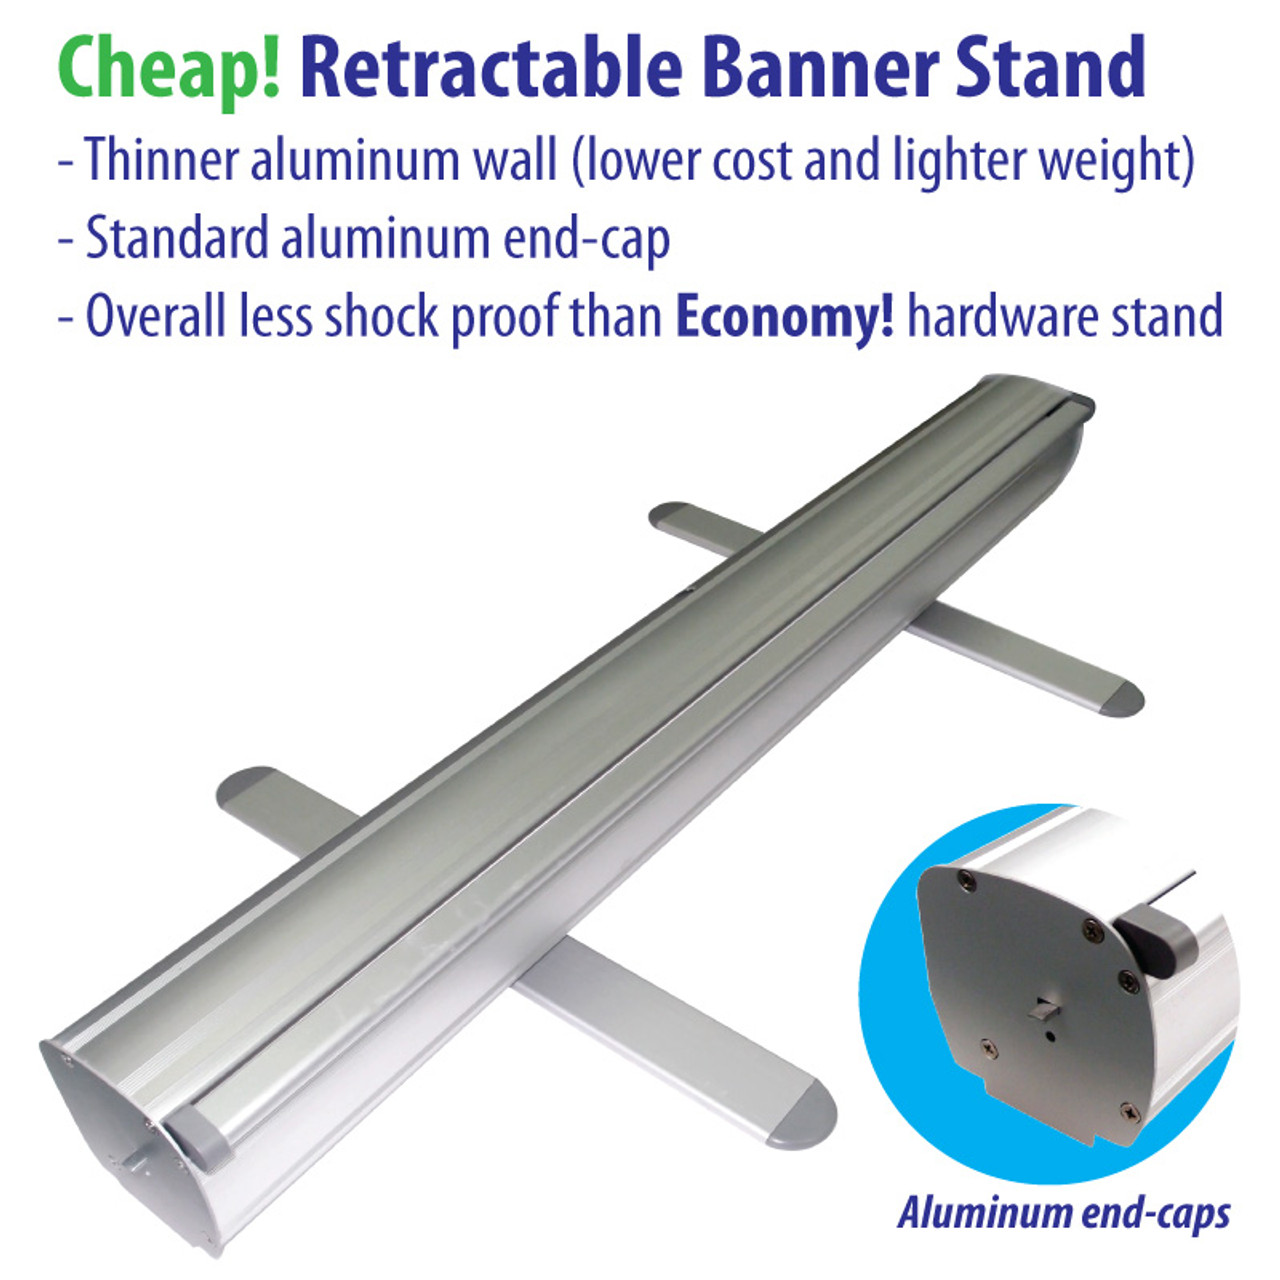 QuickSilver Pro 24 Table Top Retractable Banner Stand